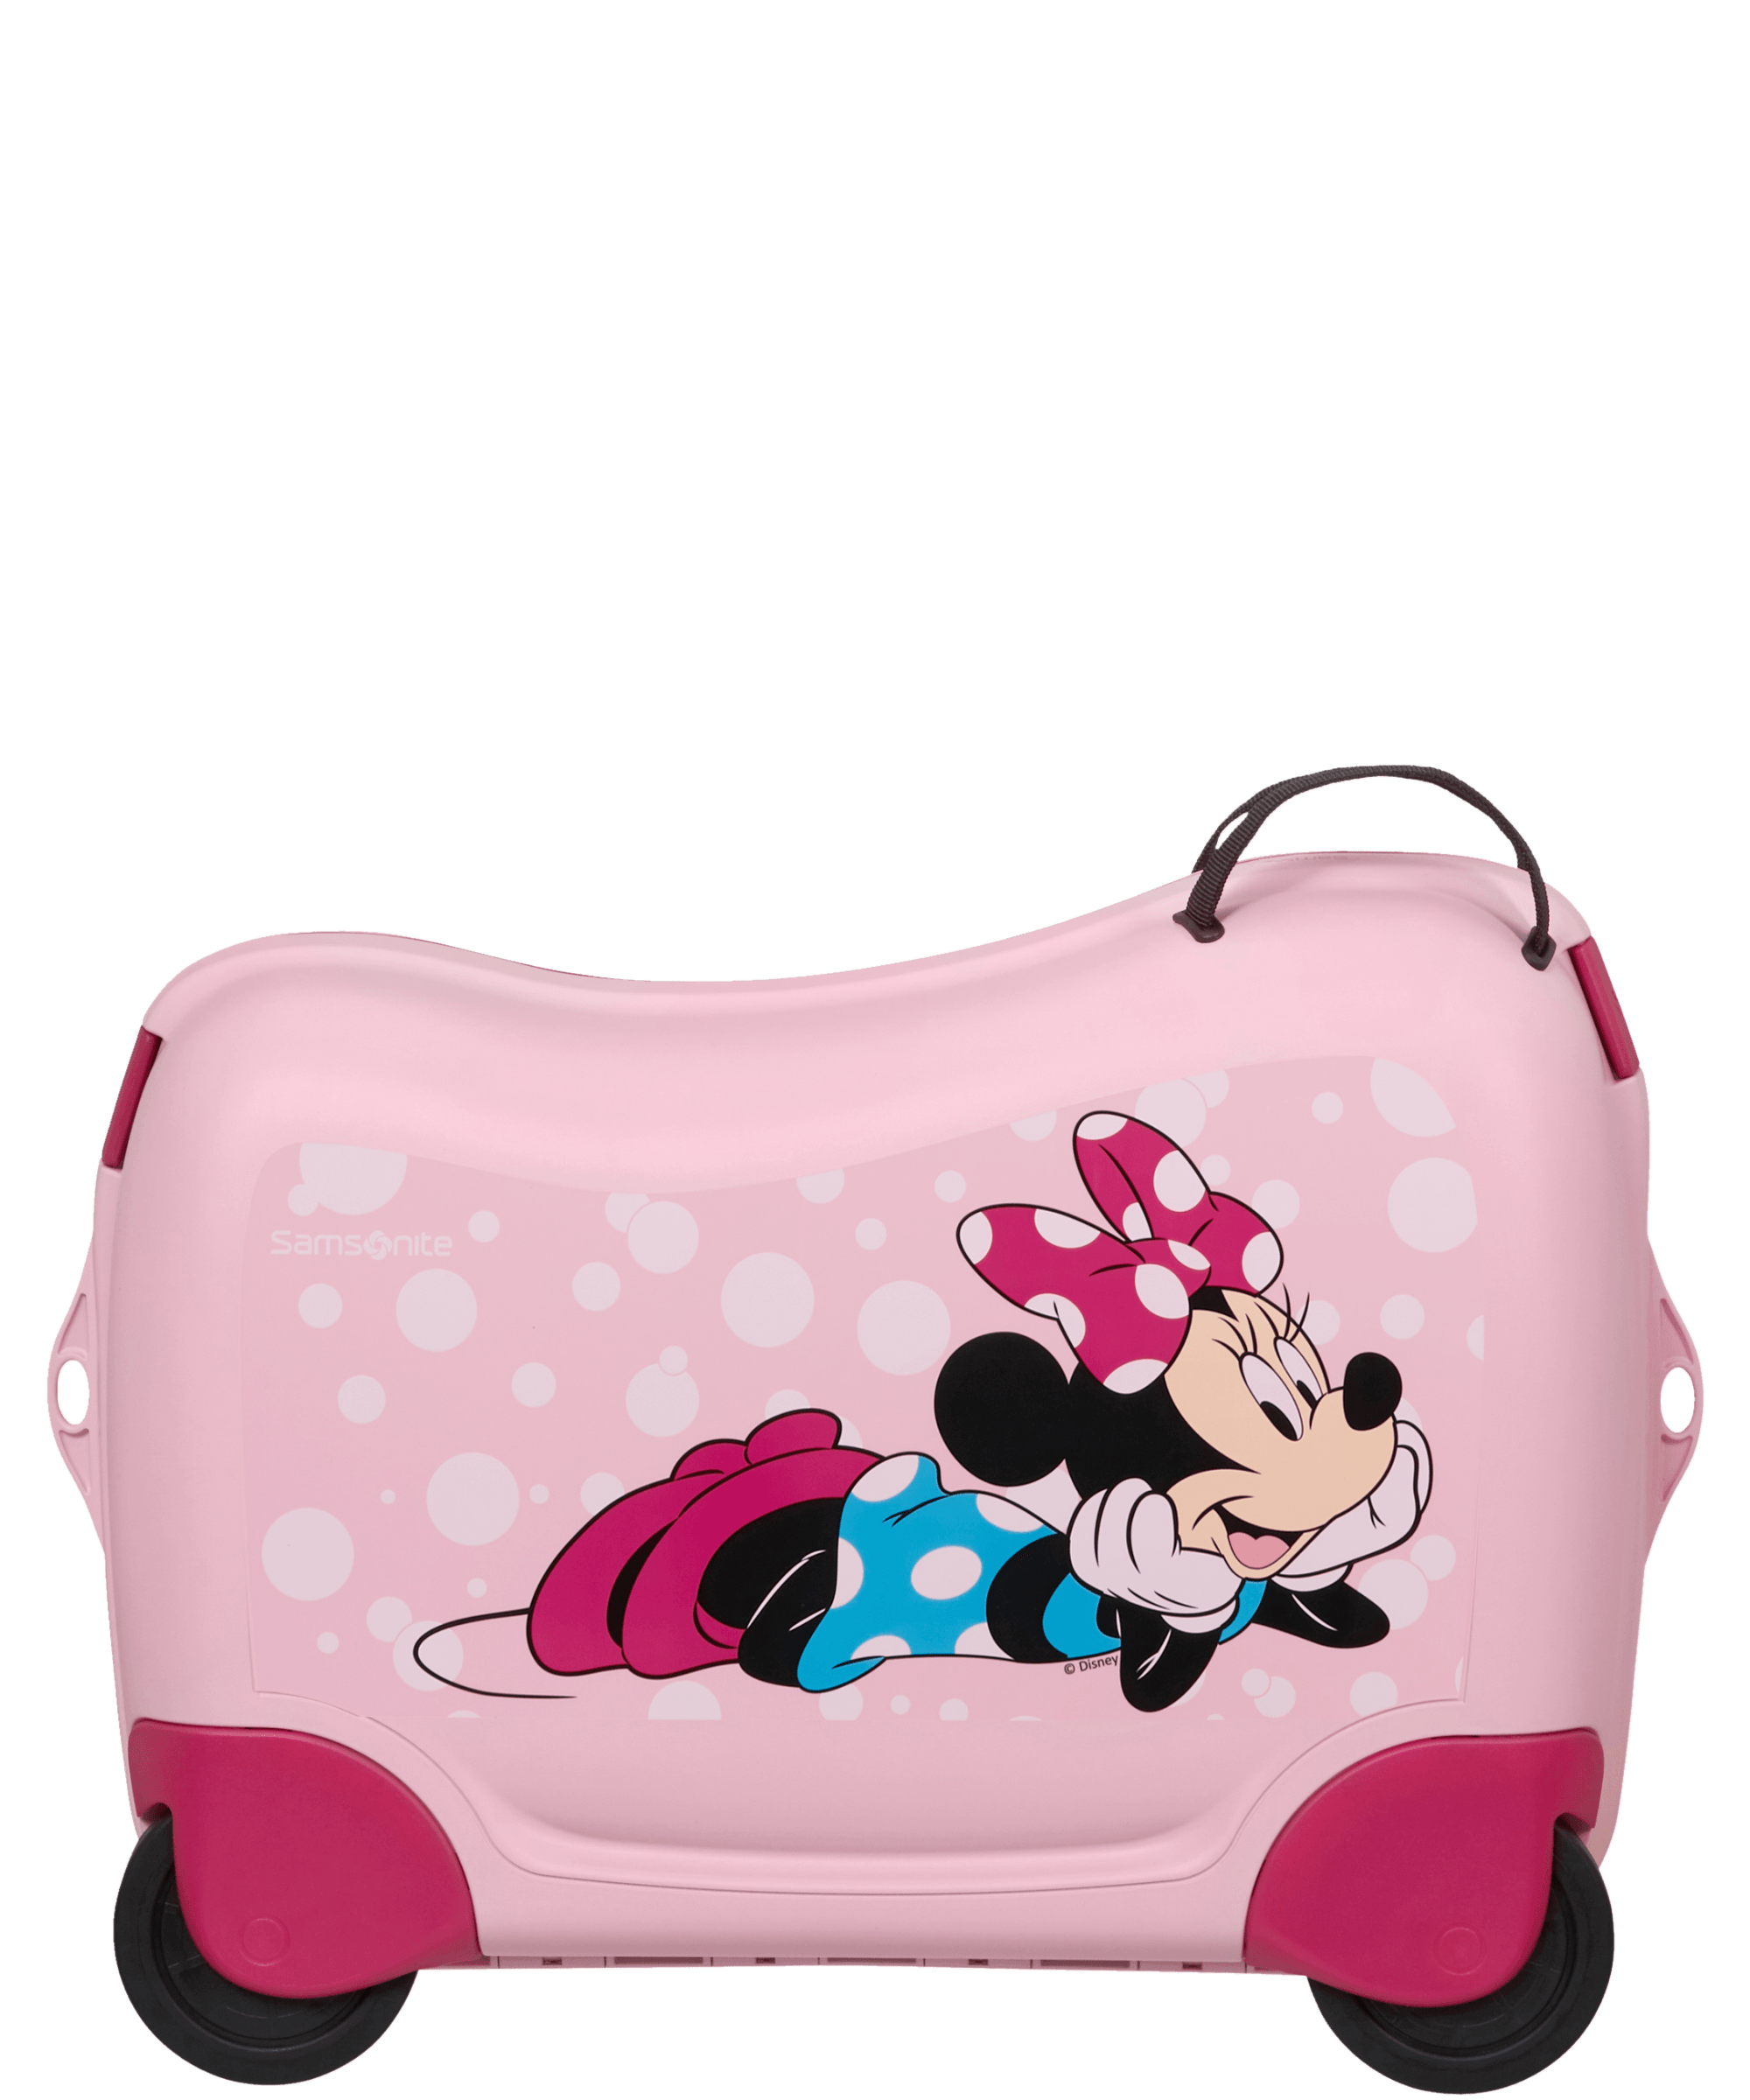 The 14 Best Carry-on Luggage for Kids in 2023 [Buyer's Guide]